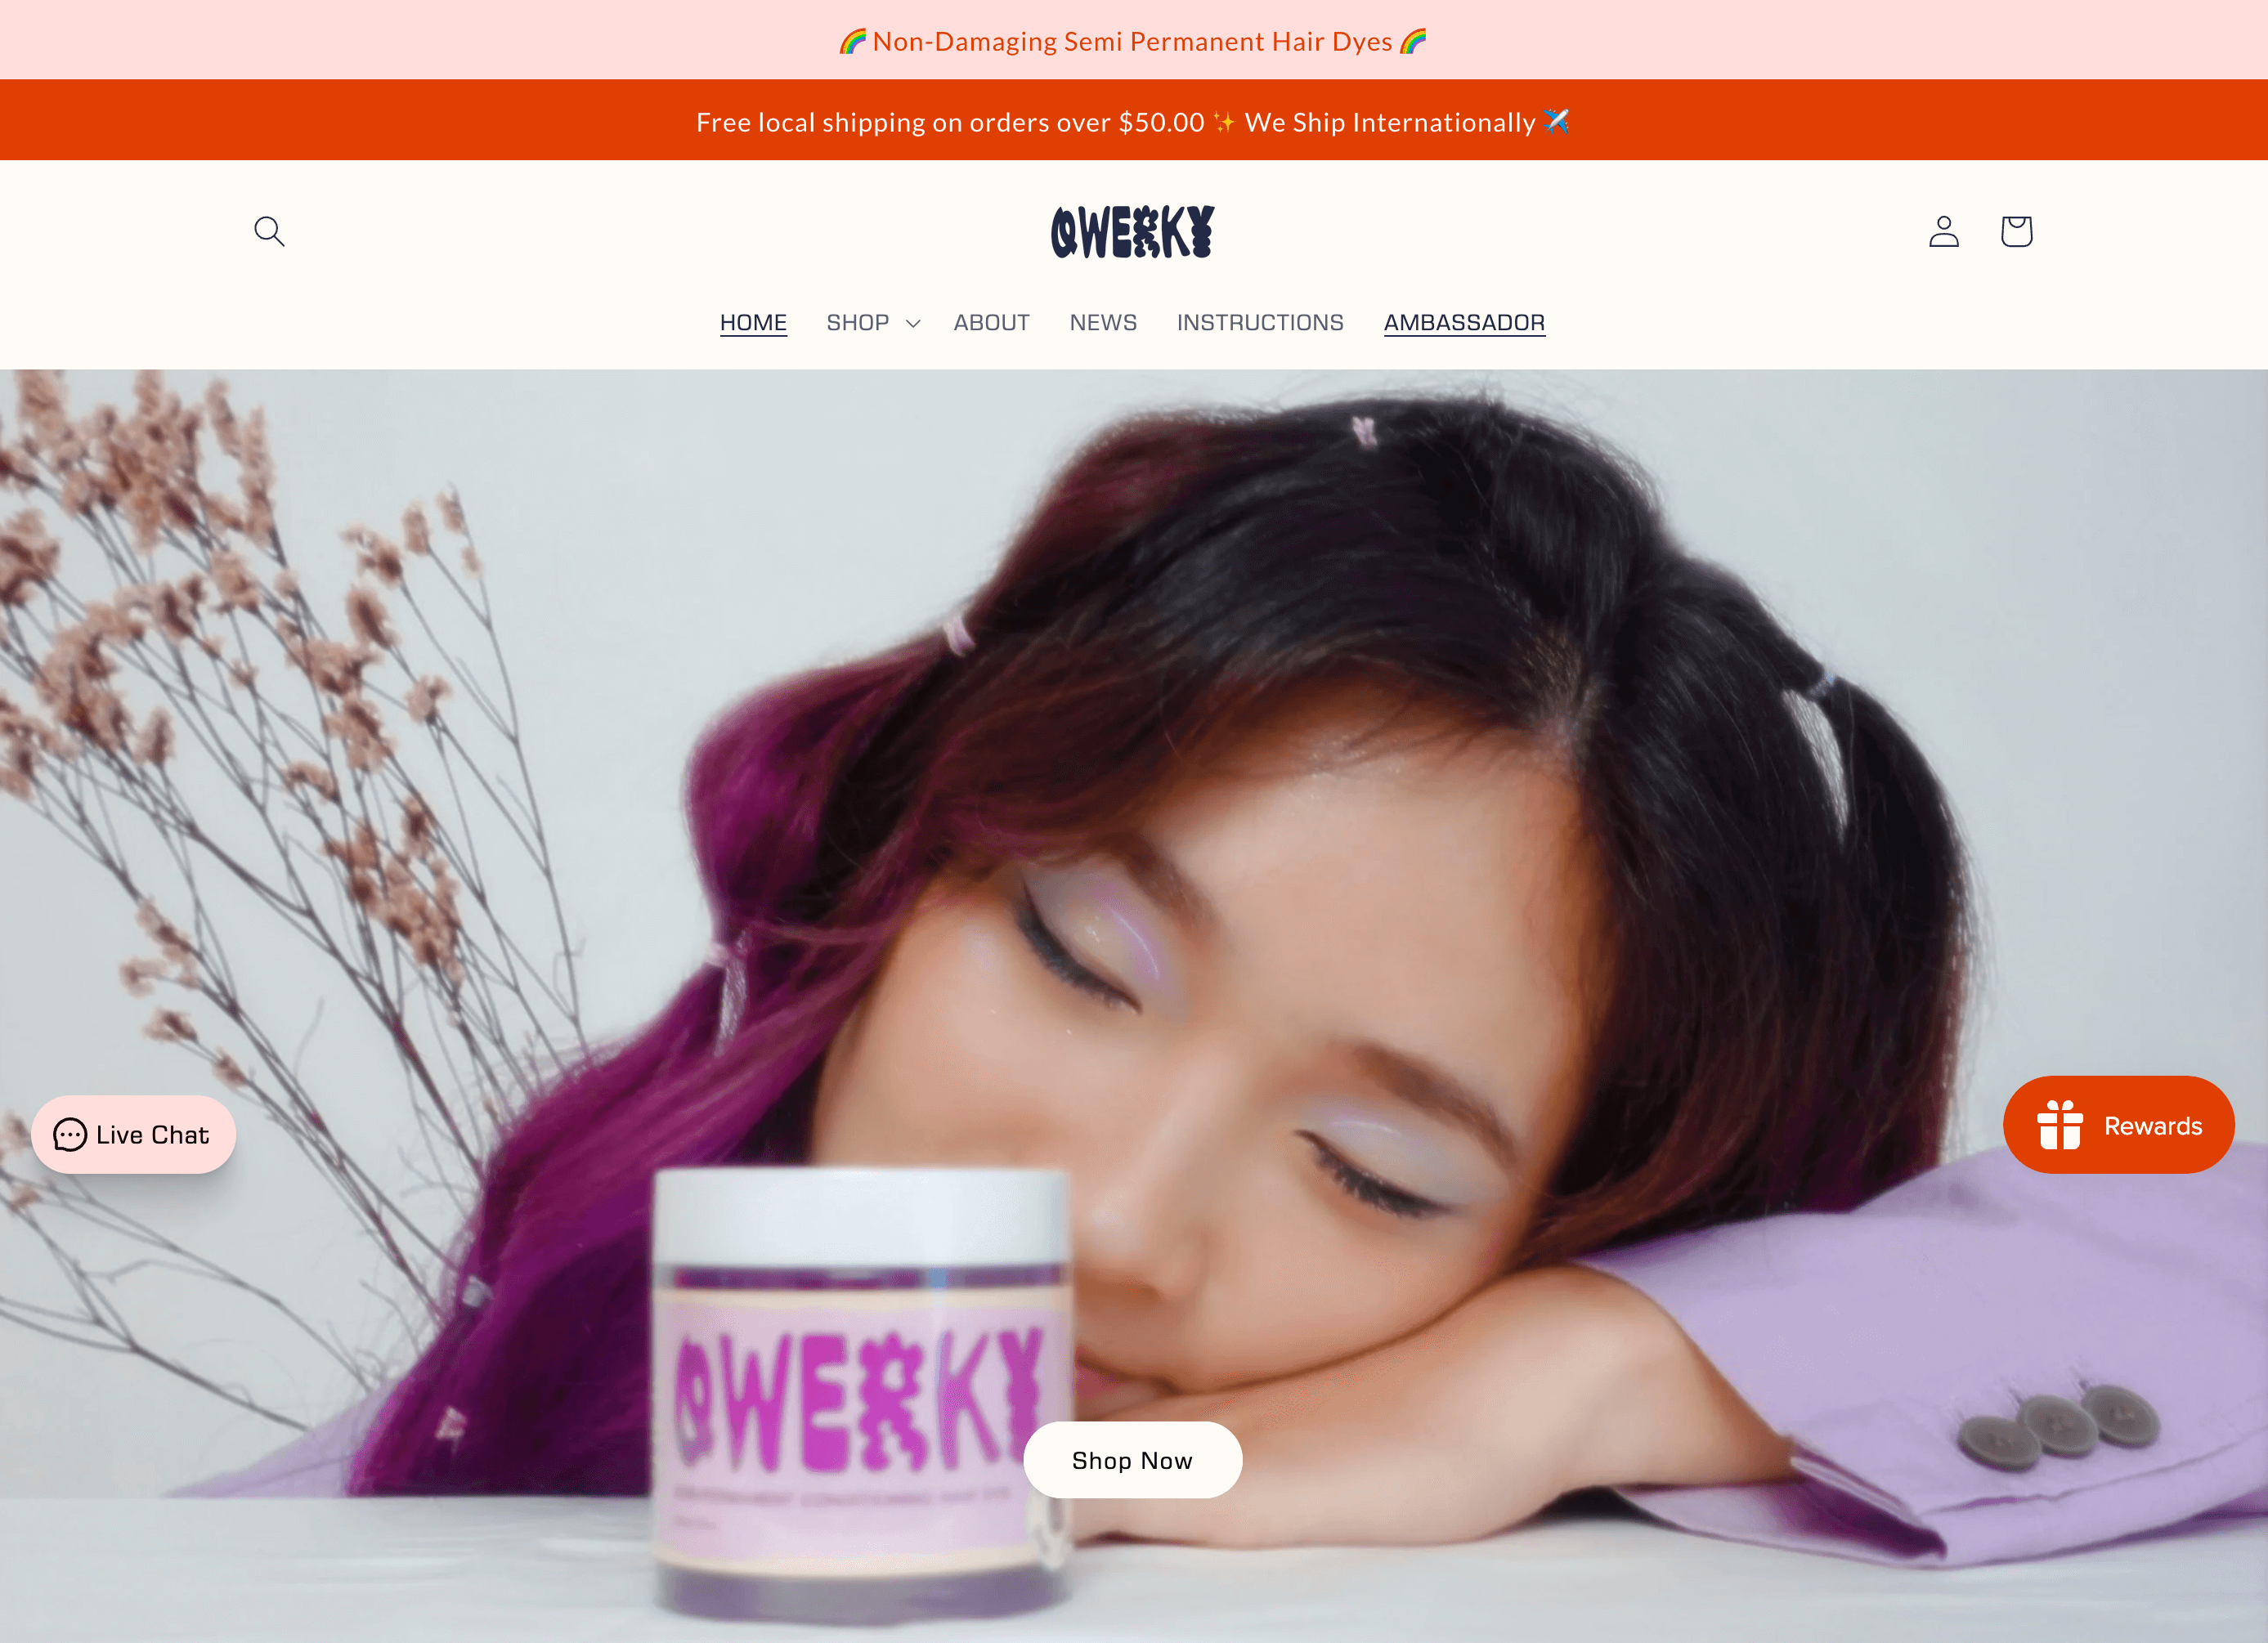 Storytelling Brands–QWERKY’s homepage of its website shows a banner image of a smiling, Asian woman with dip-dyed purple hair. In front of her face is a jar of QWERKY hair dye. 